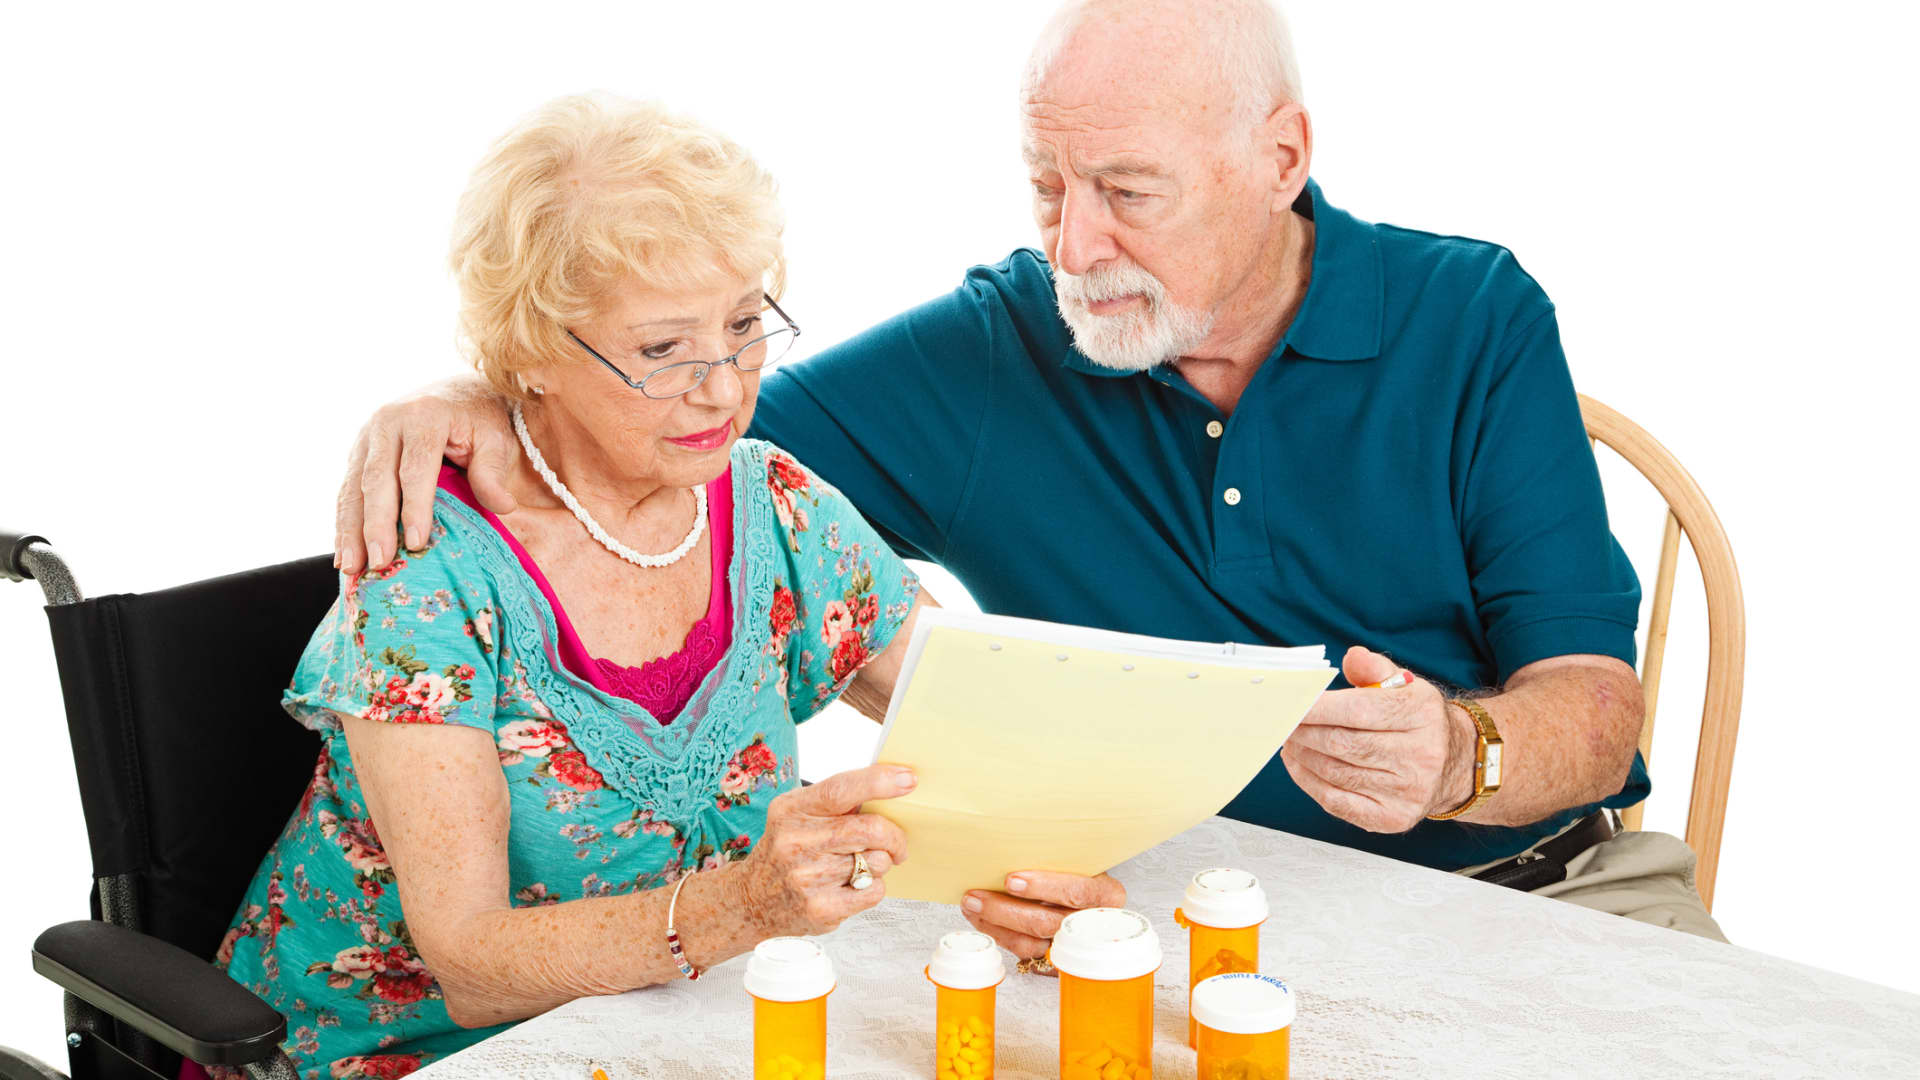 americans-can-expect-to-pay-a-lot-more-for-medical-care-in-retirement